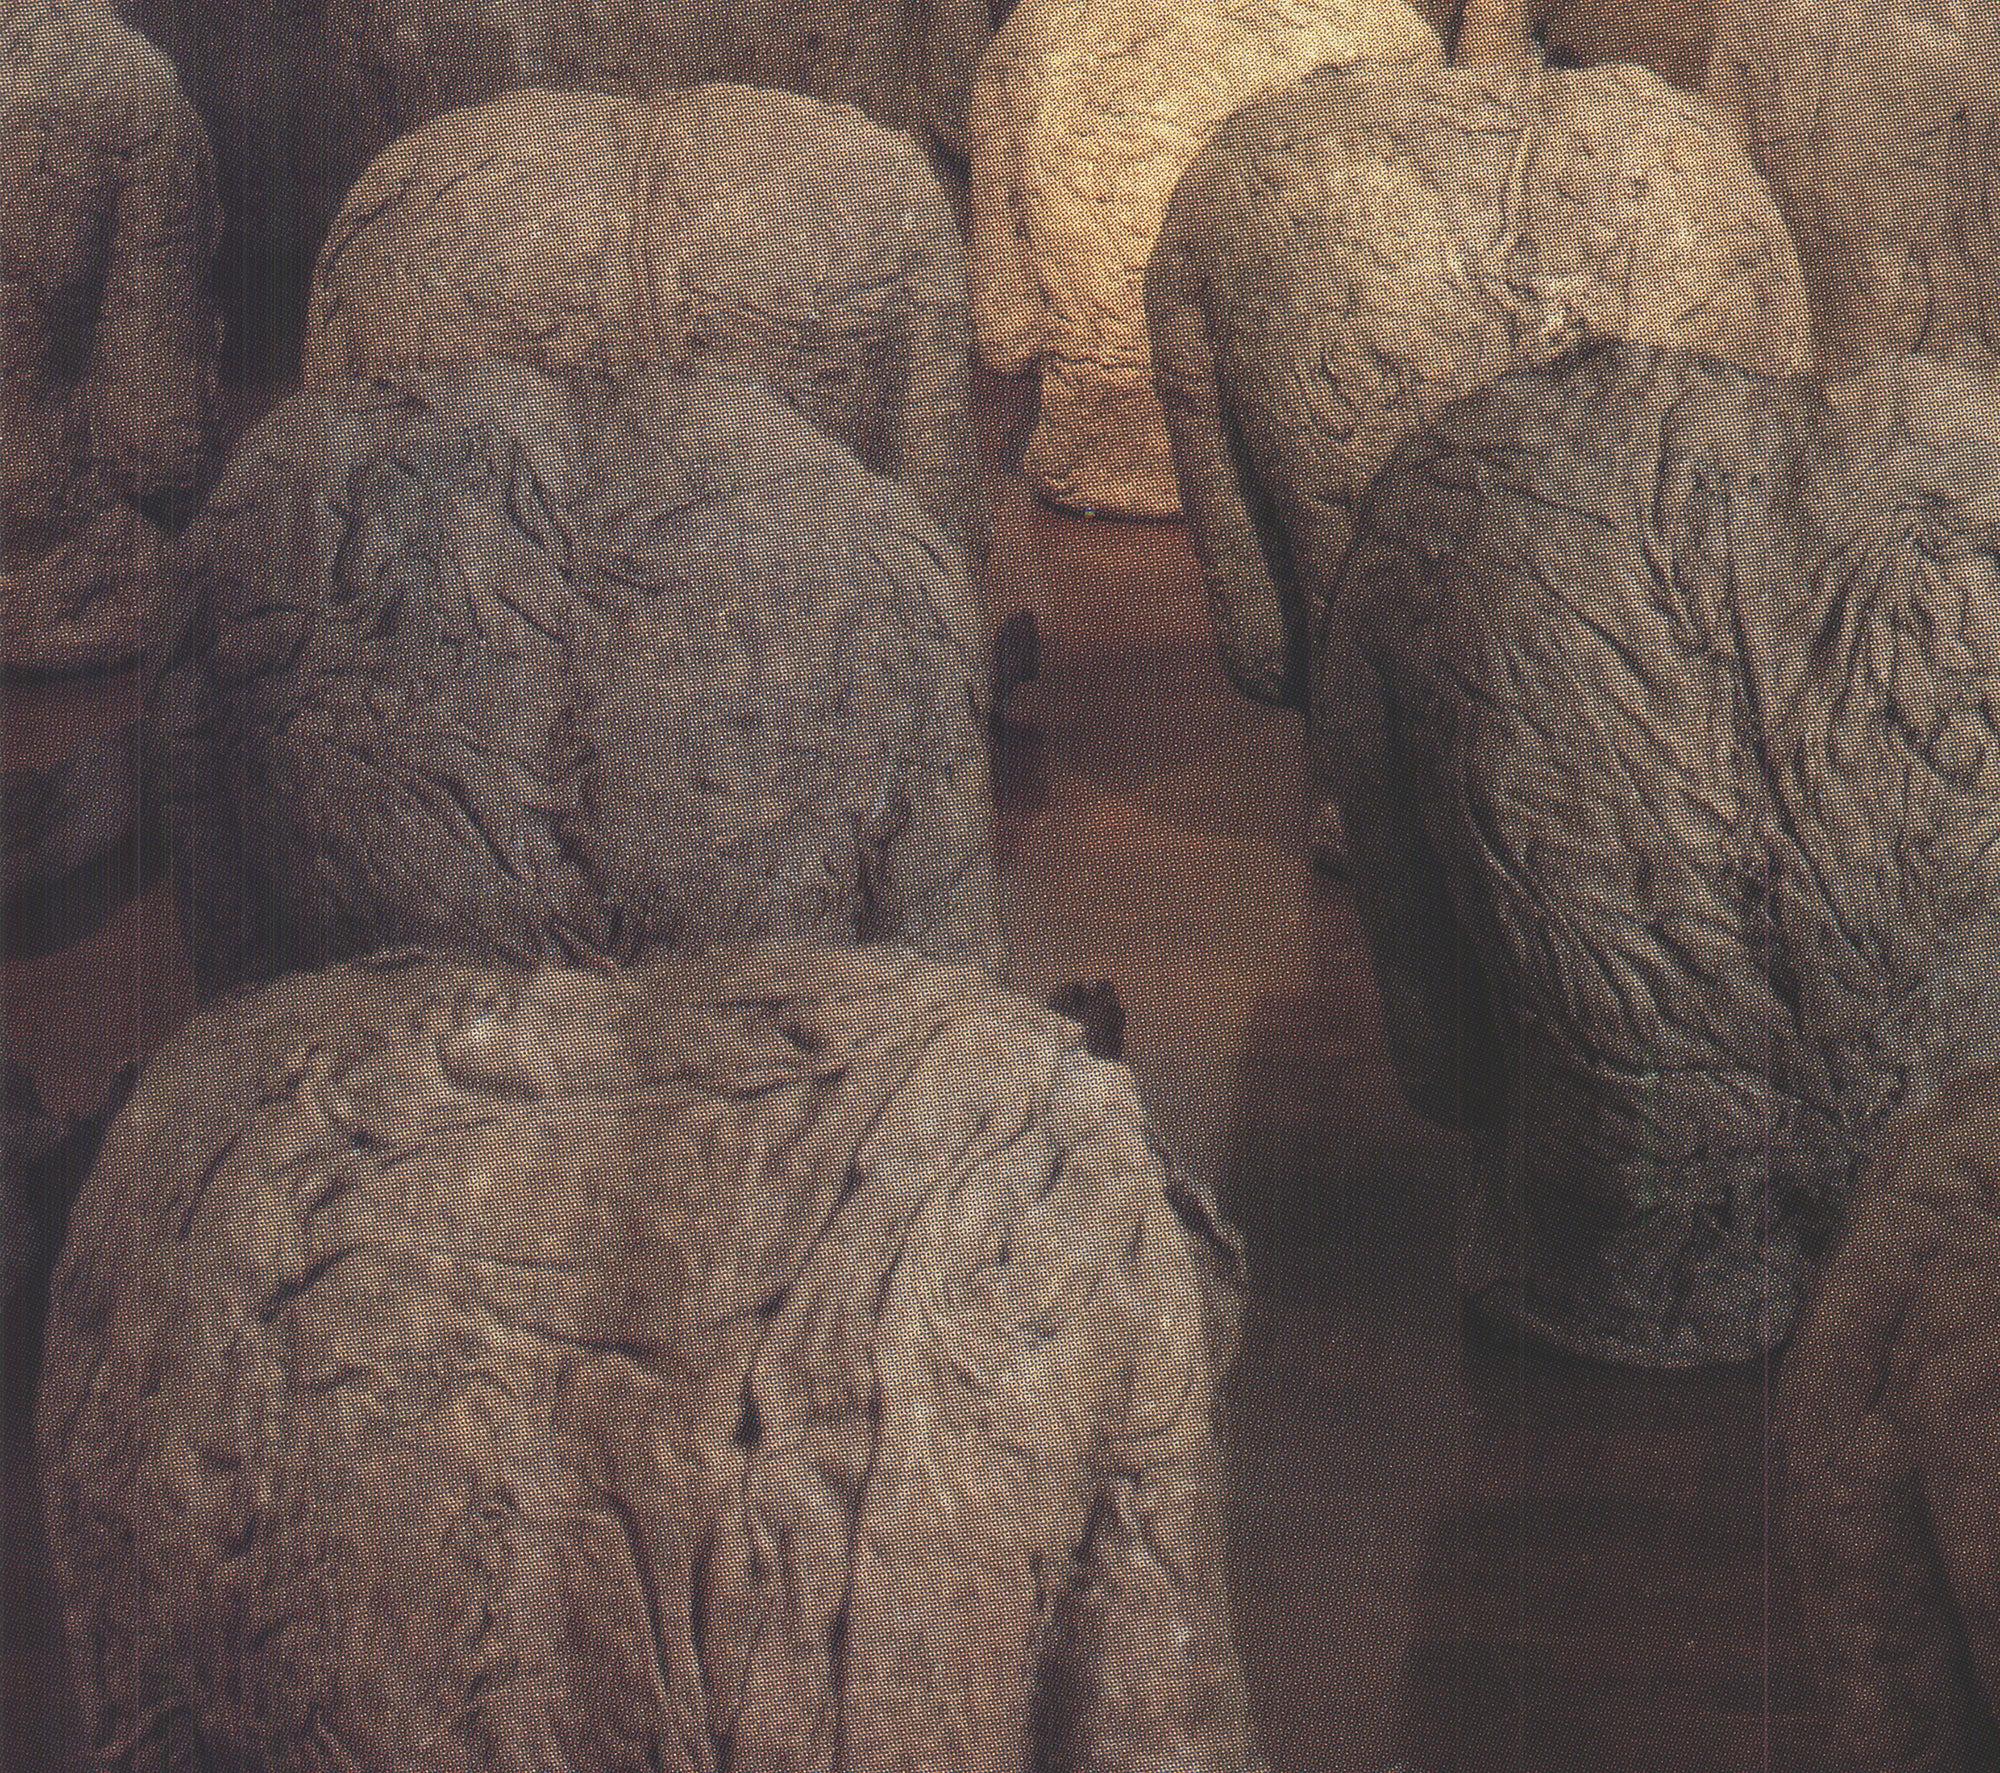 abakanowicz magdalena paintings online